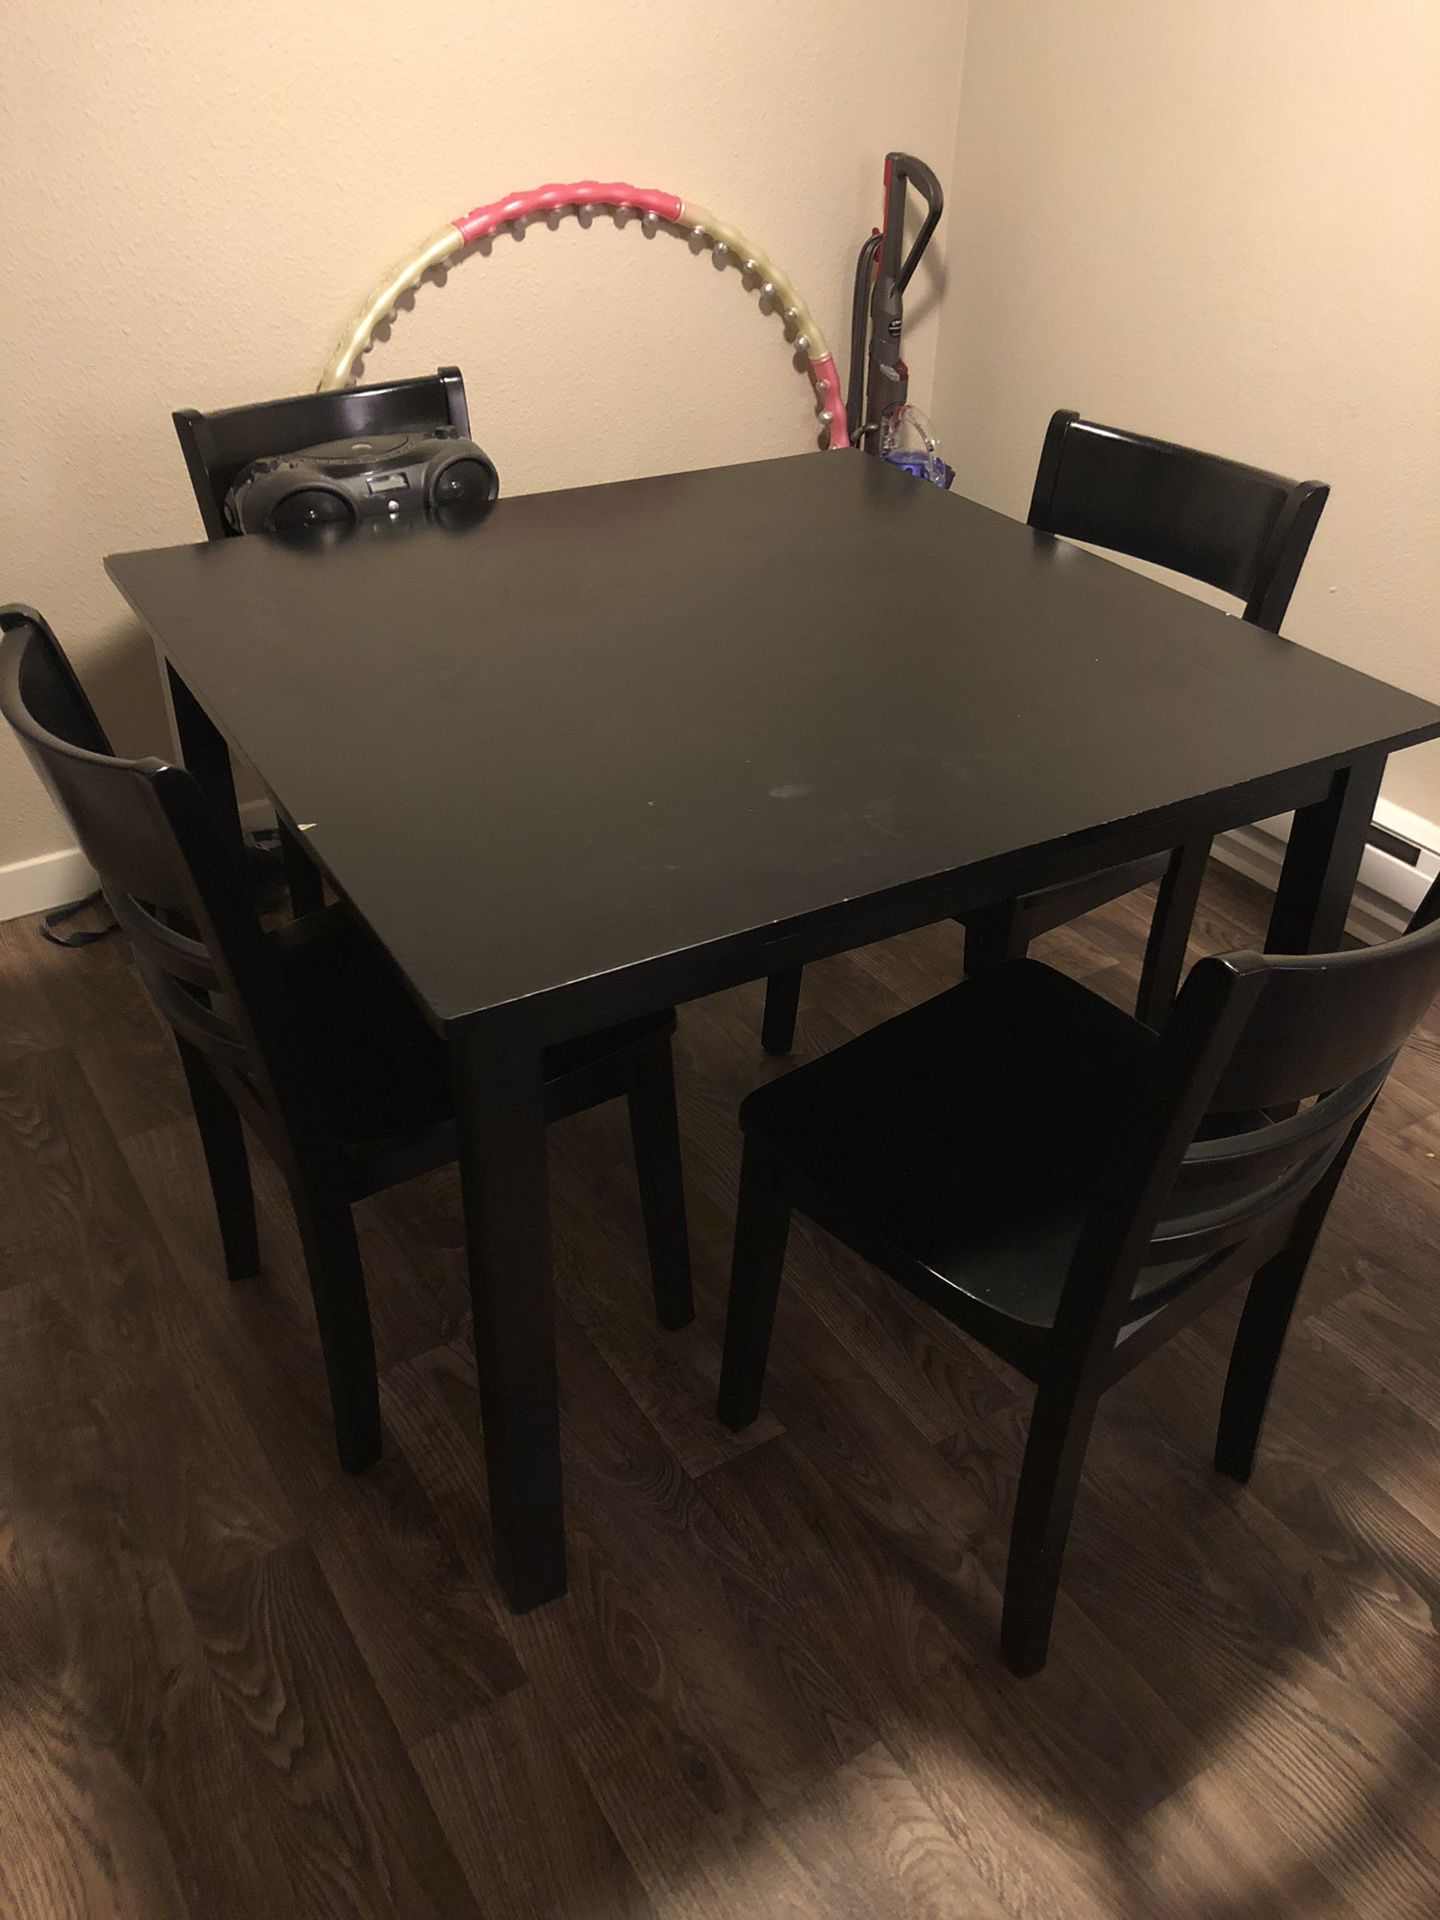 Ikea dining table sale! Pick up only